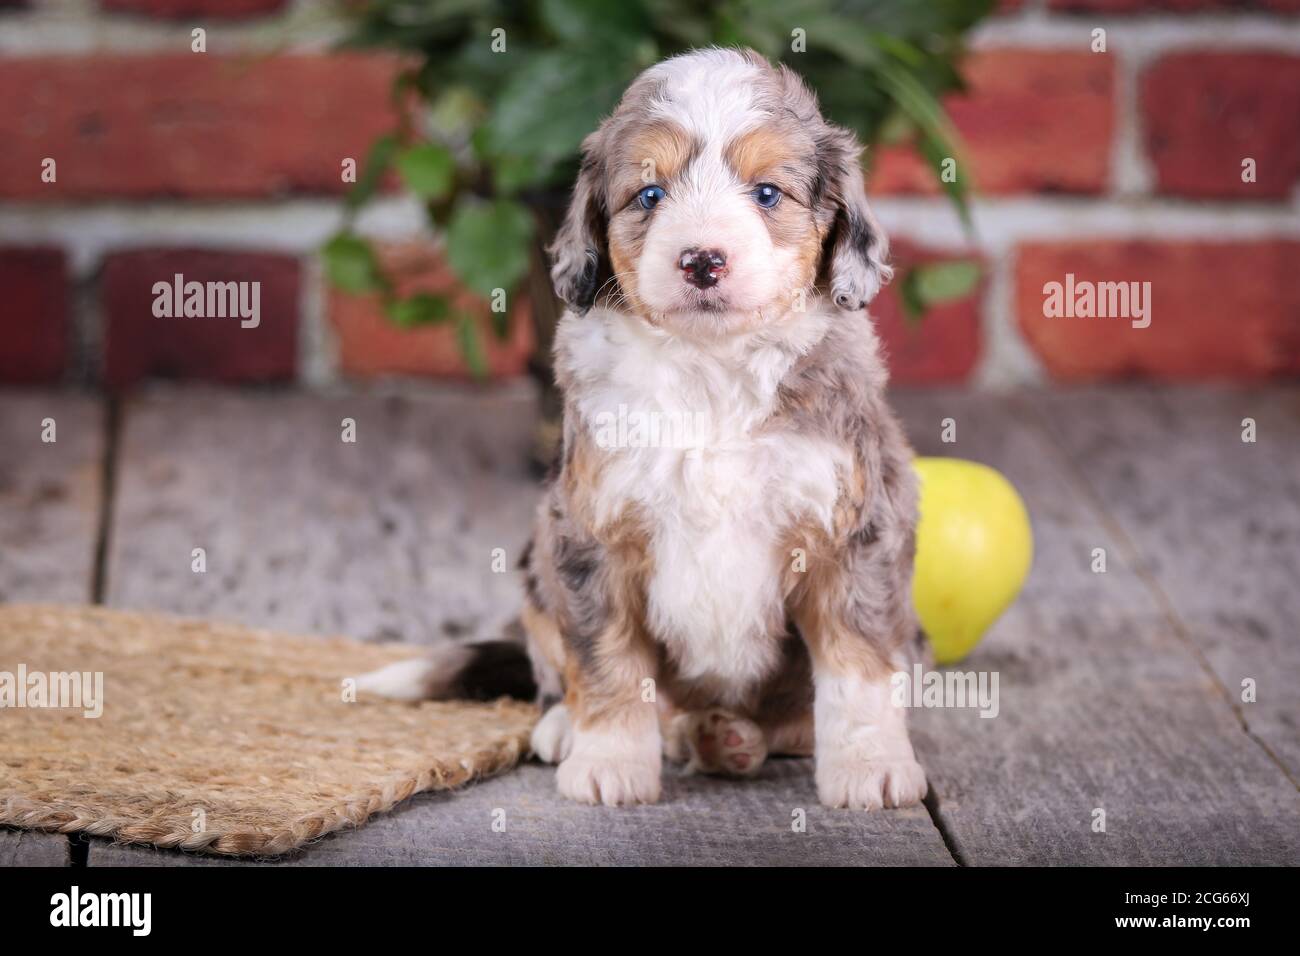 Mini Aussiedoodle puppy sitting on wood floor with brick wall and apples in background Stock Photo